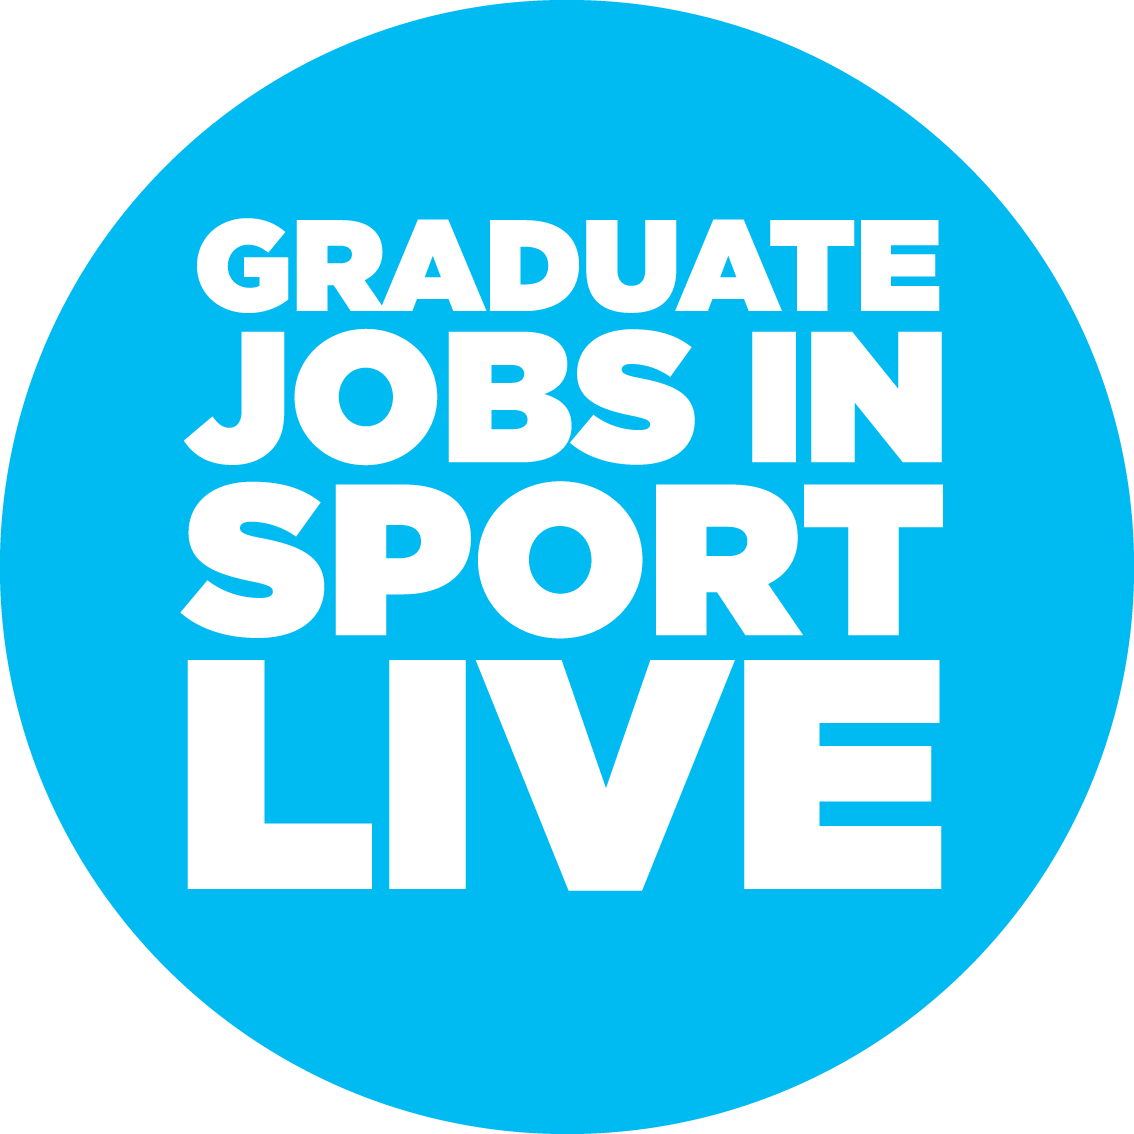 Thursday 19th March 2015, Bucks New University, High Wycombe - the only careers event entirely dedicated to helping graduates get a career in sport.